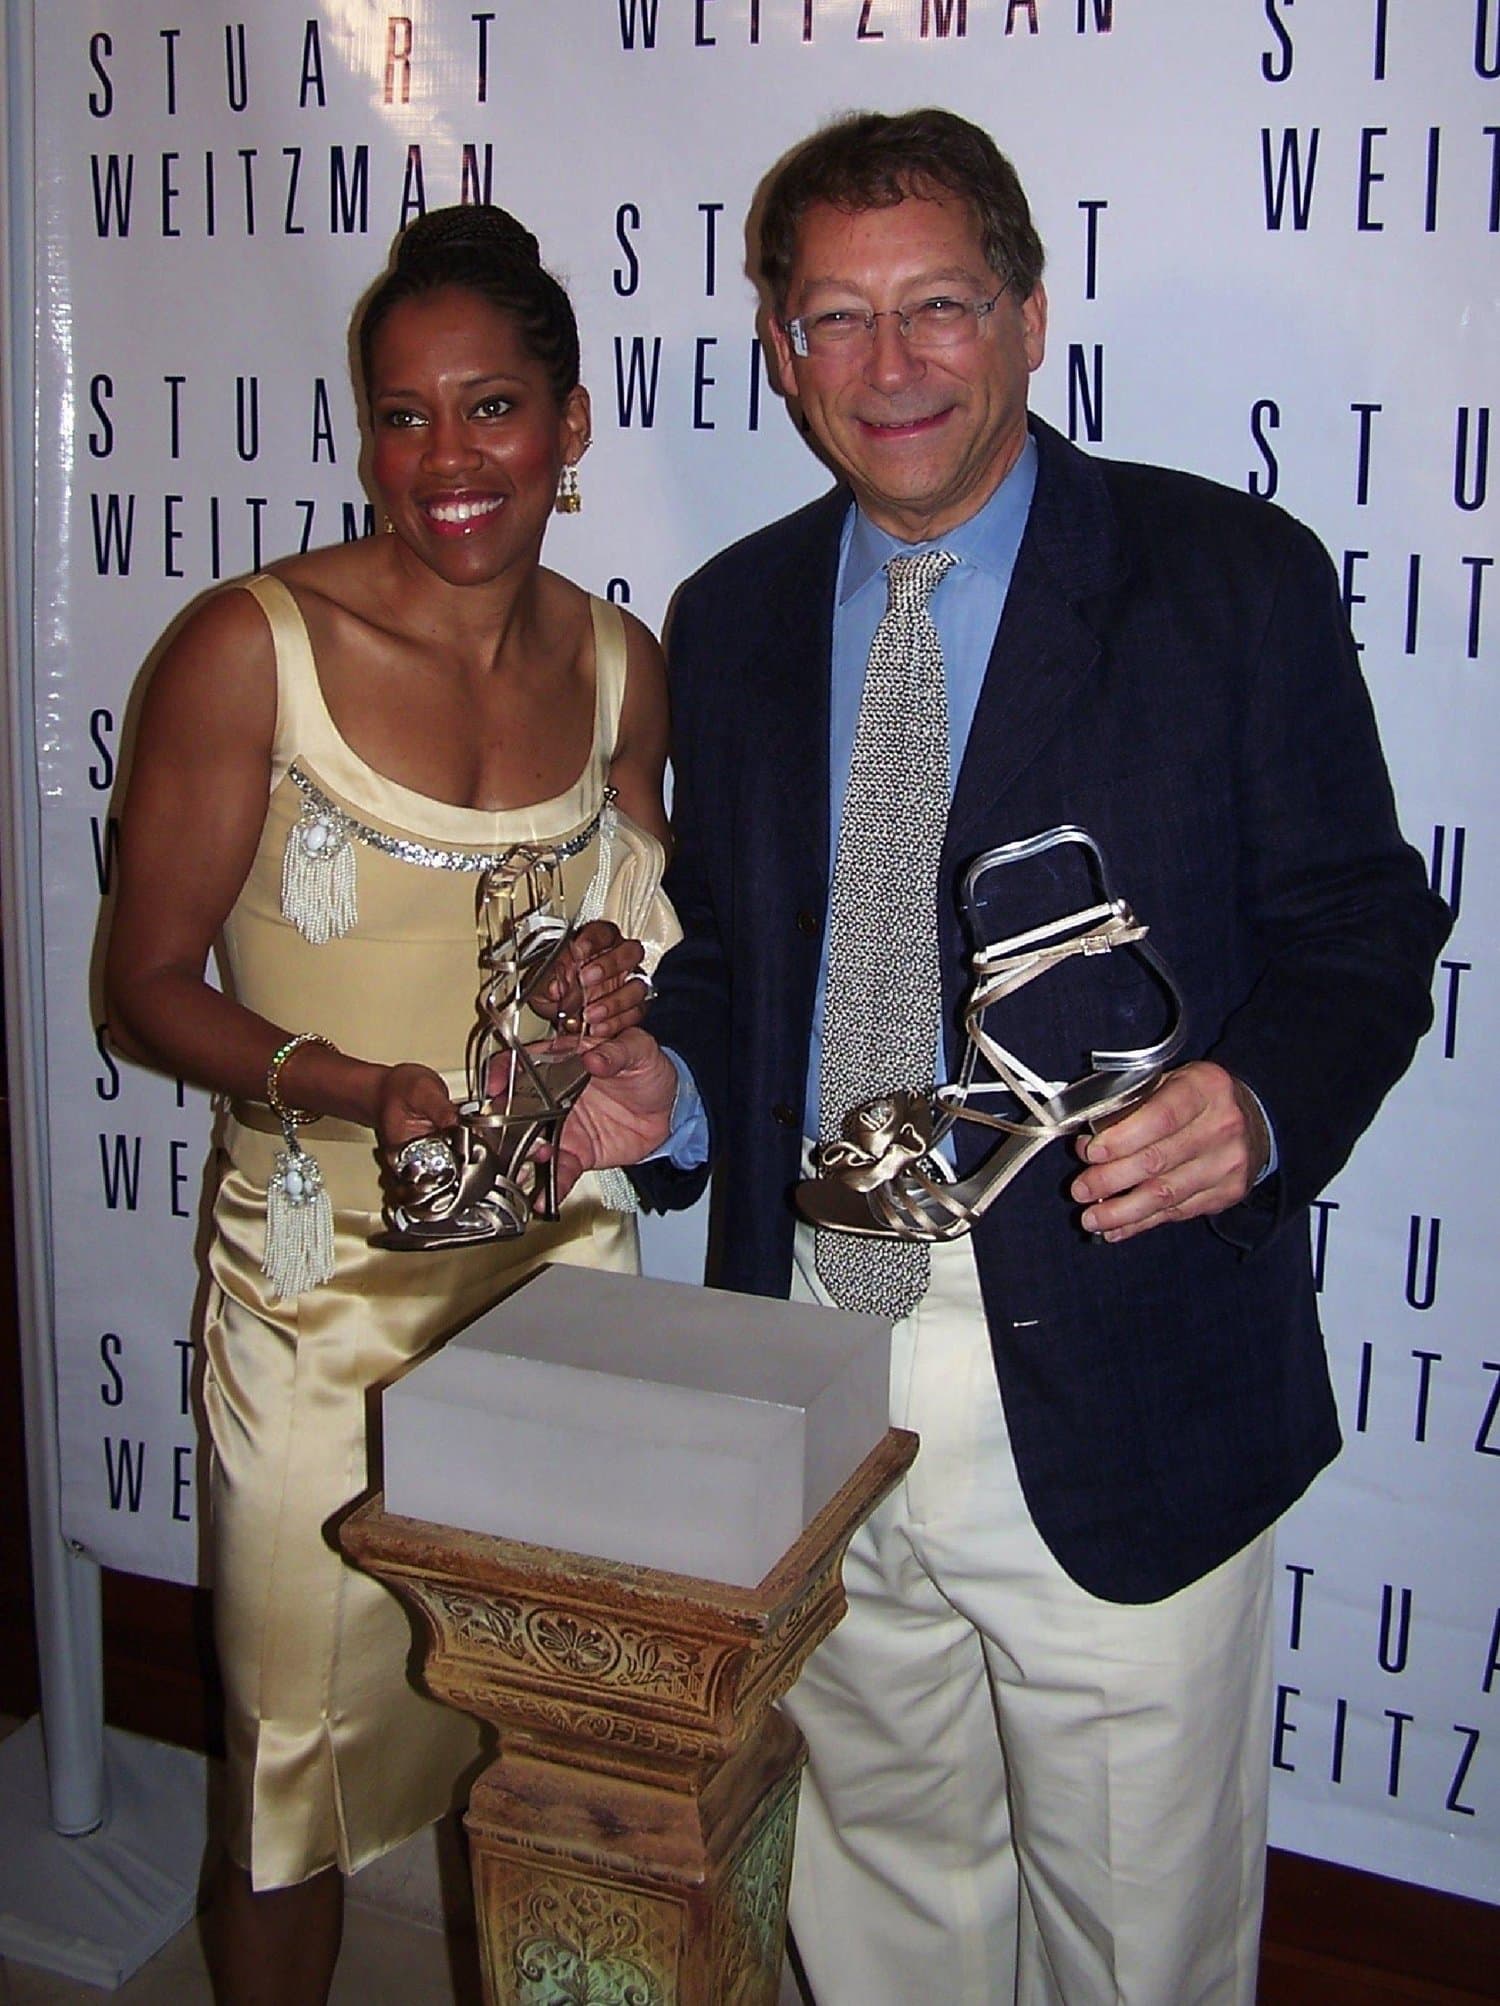 Actress Regina King and shoe designer Stuart Weitzman at the unveiling of the custom shoes (2 pieces of Marilyn Monroe's jewels embedded in the satin) that she would be wearing to the 2005 Academy Awards